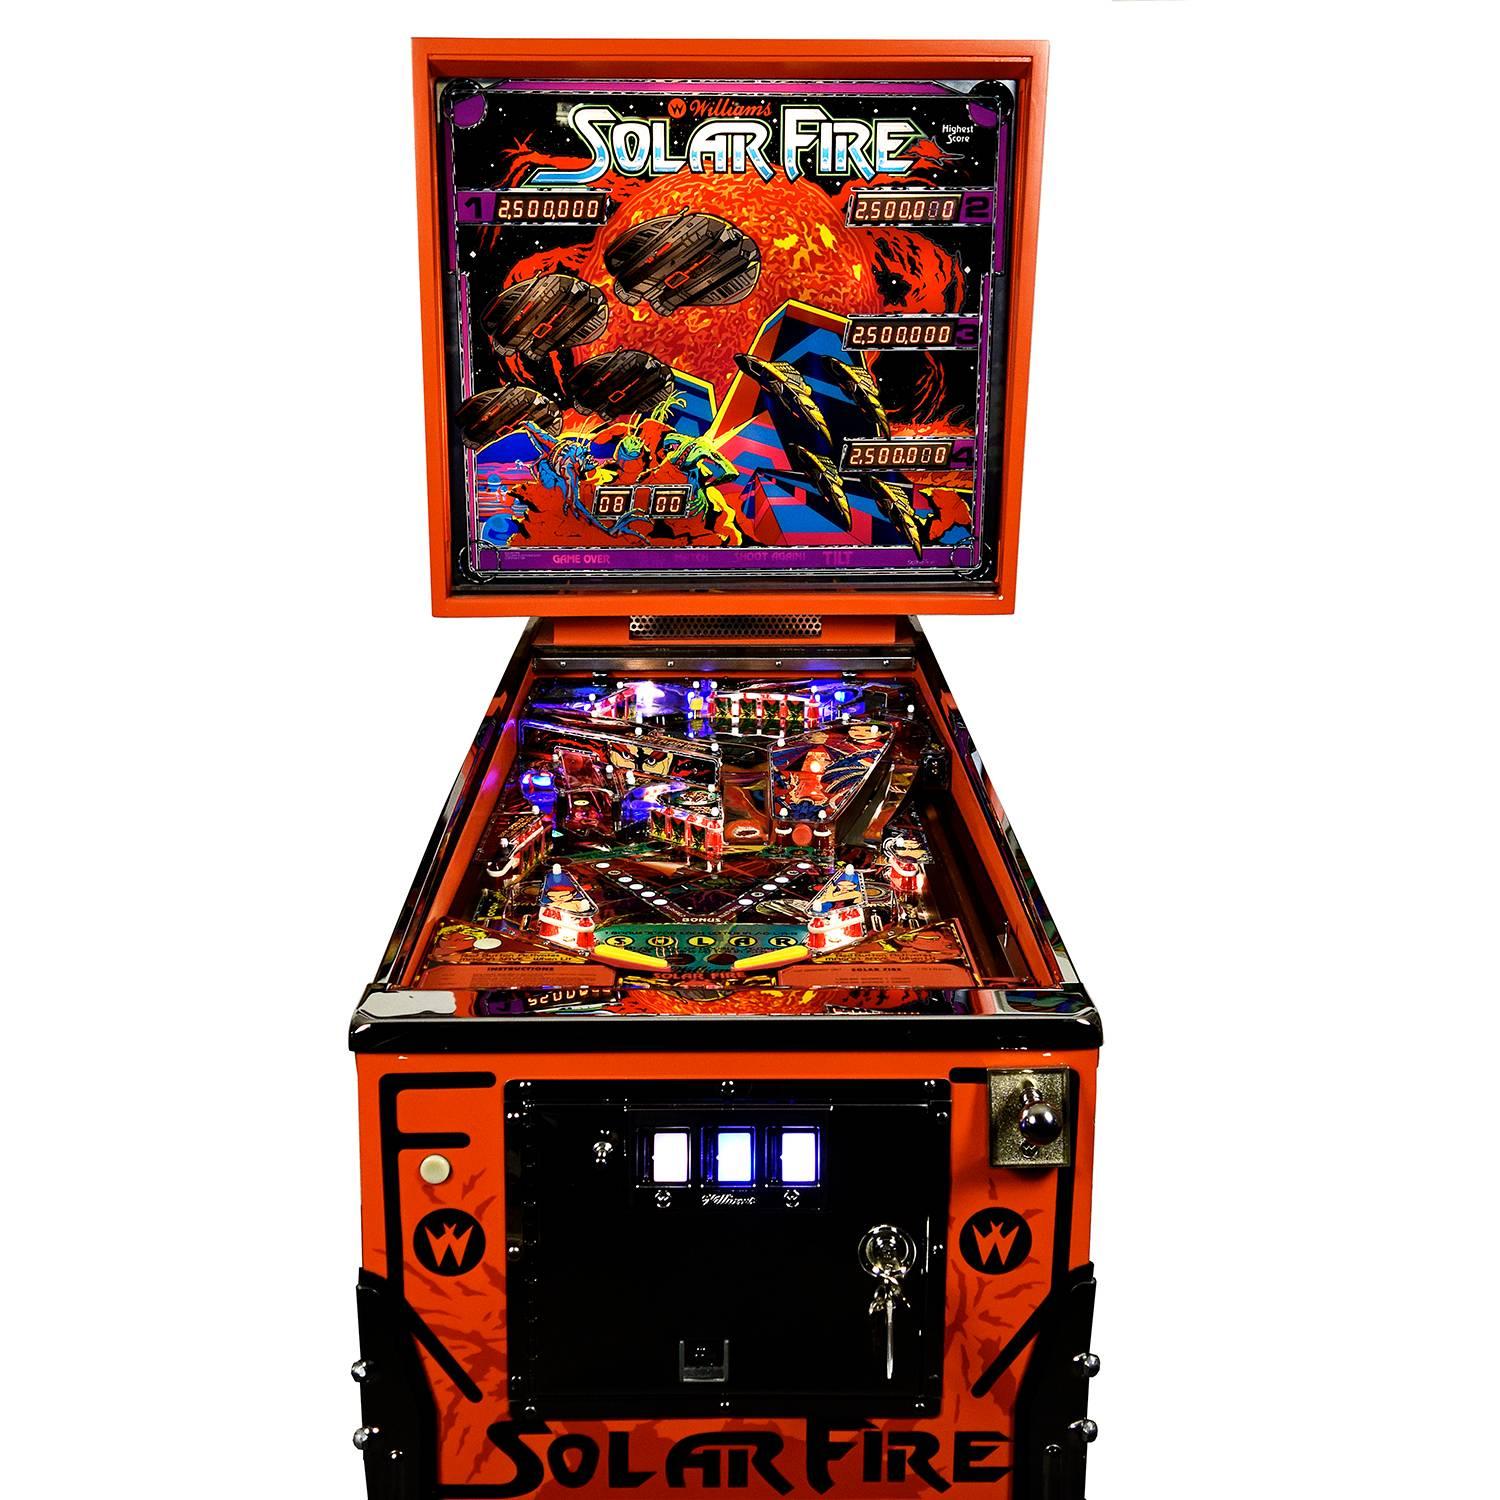 Solar Fire
Make: Williams
Date of Built: Juli 1981
Designer: Barry Oursler
Artwork: Constantino Mitchell
Number made: 782
Origin: Stockholm, Sweden
One of rarest and sought-after Williams pinball machines of the early 80’s. And this huge